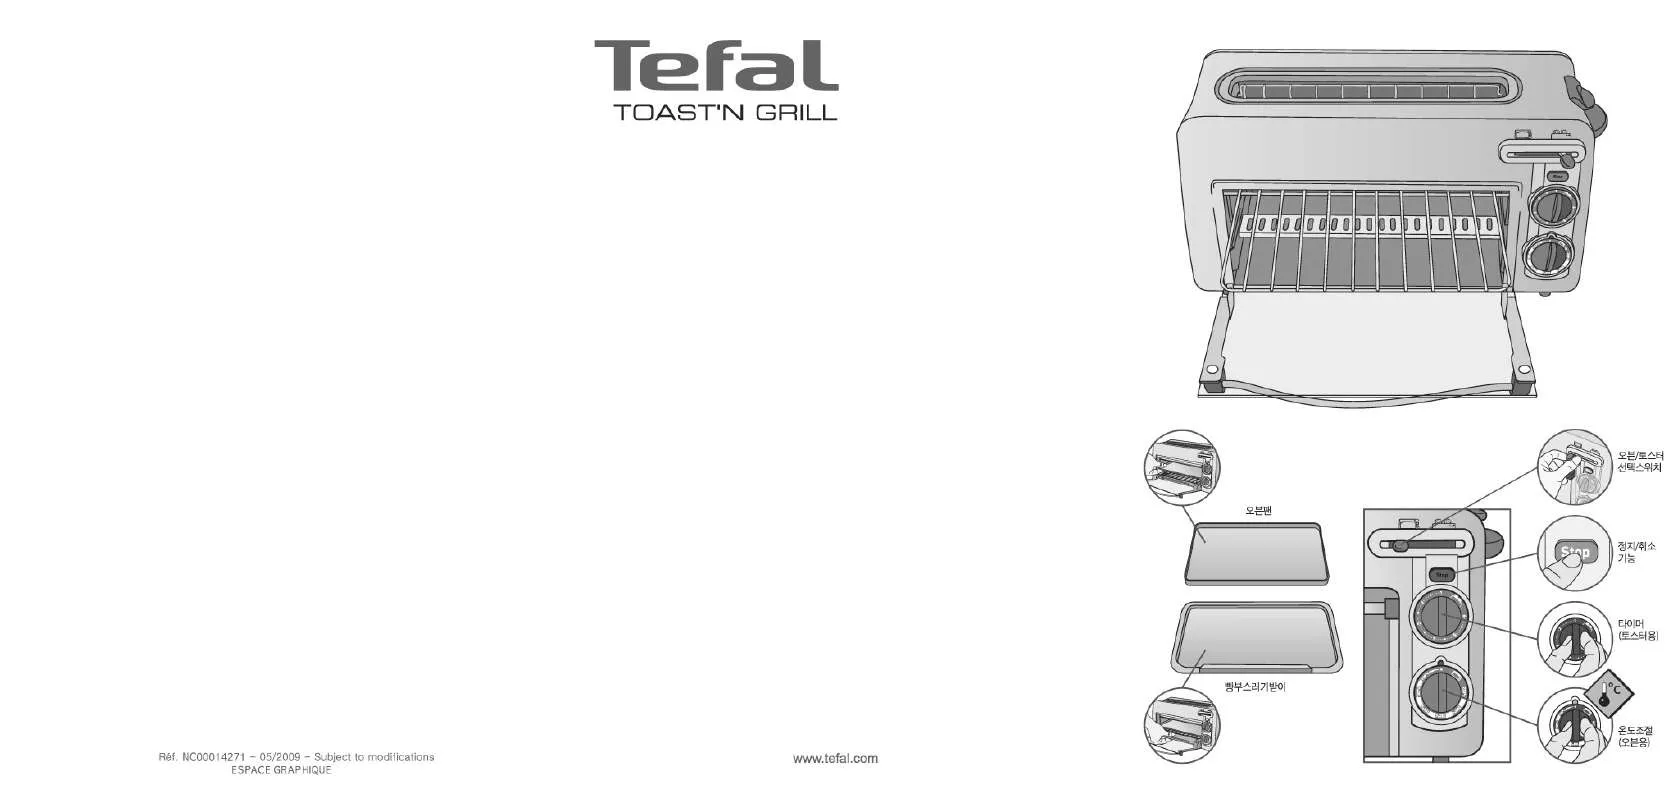 Mode d'emploi TEFAL TOAST N GRILL